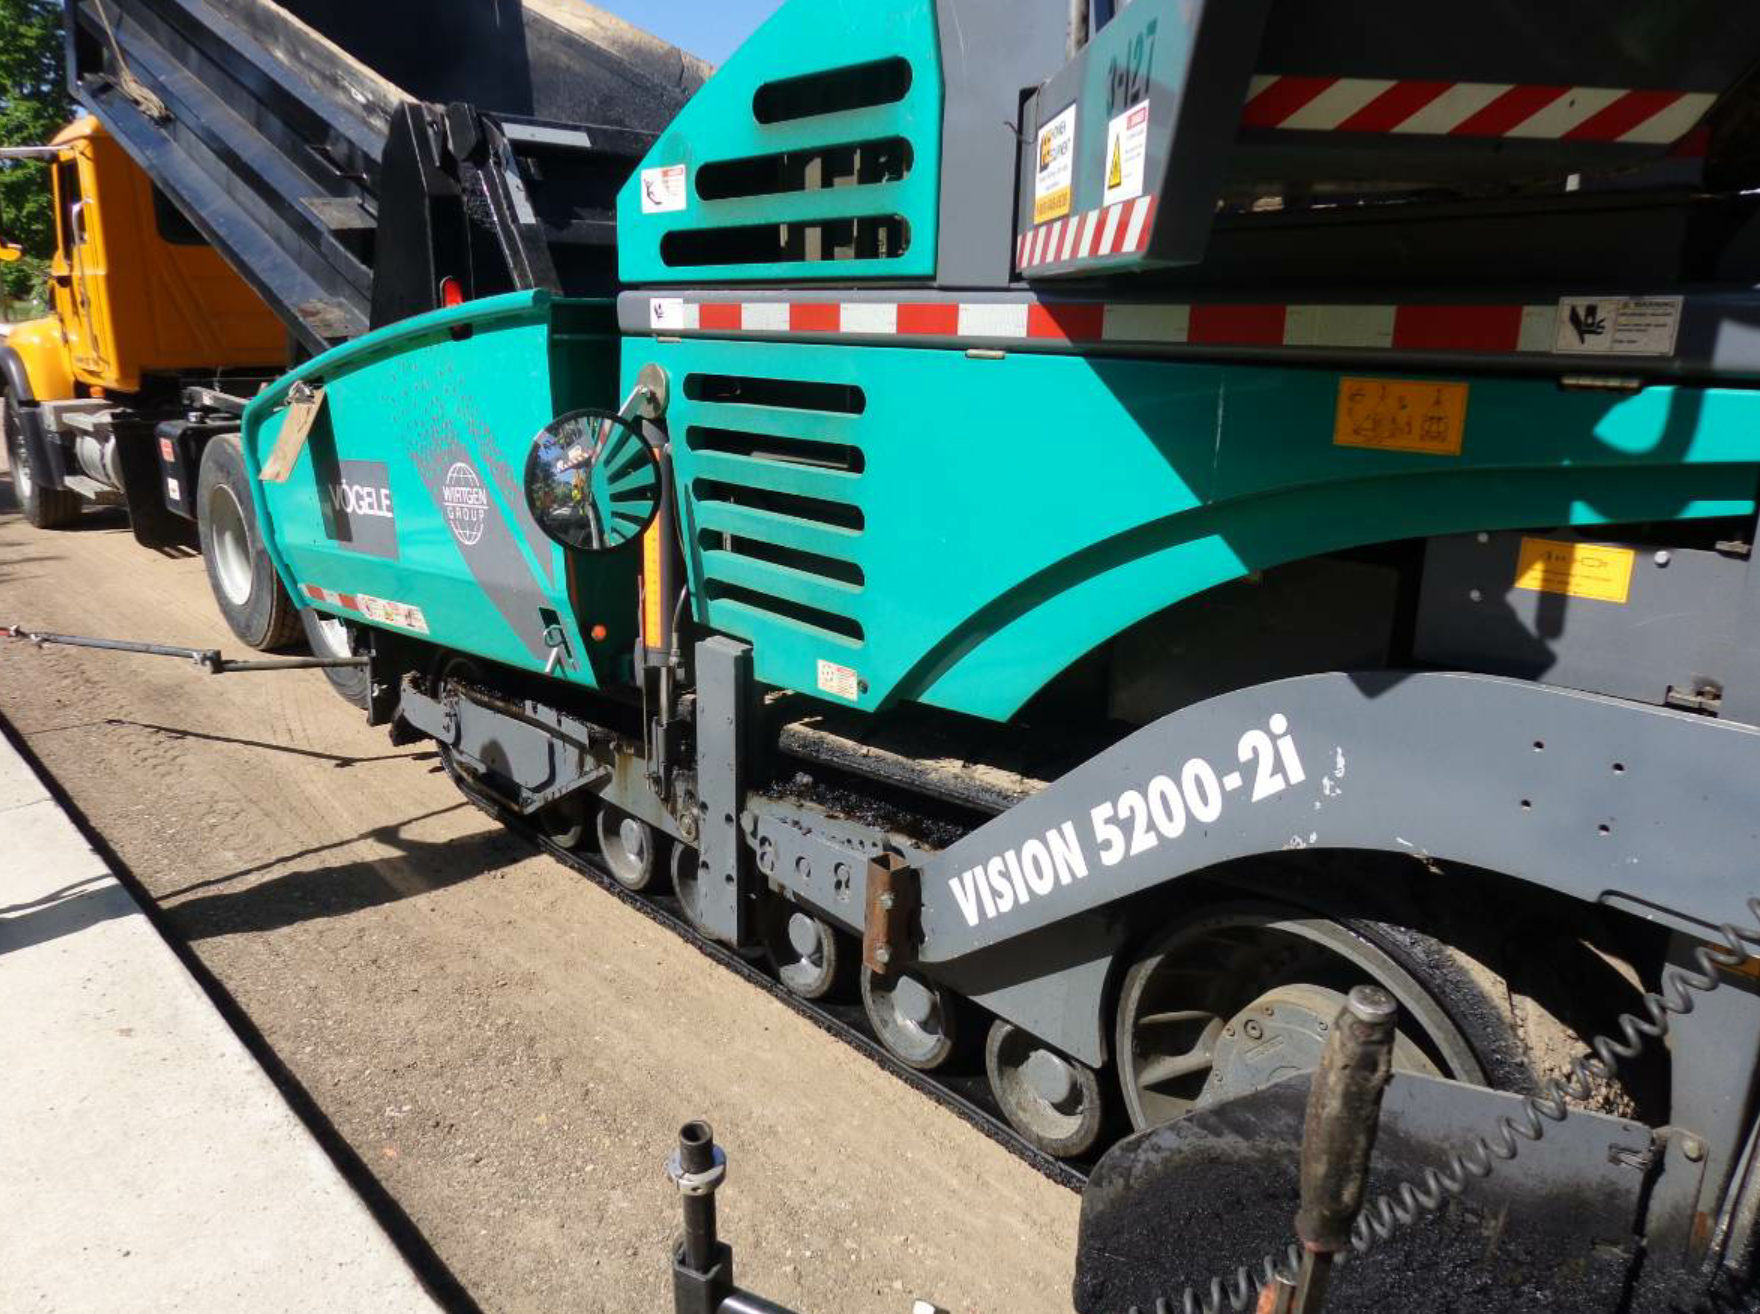 This team has attached an 8-inch convex mirror to a heavy duty, flat magnet so they can position the mirror for the paver operator’s benefit and the screed operator’s benefit. All photos courtesy John Ball, Top Quality Paving & Training, Manchester, New Hampshire.